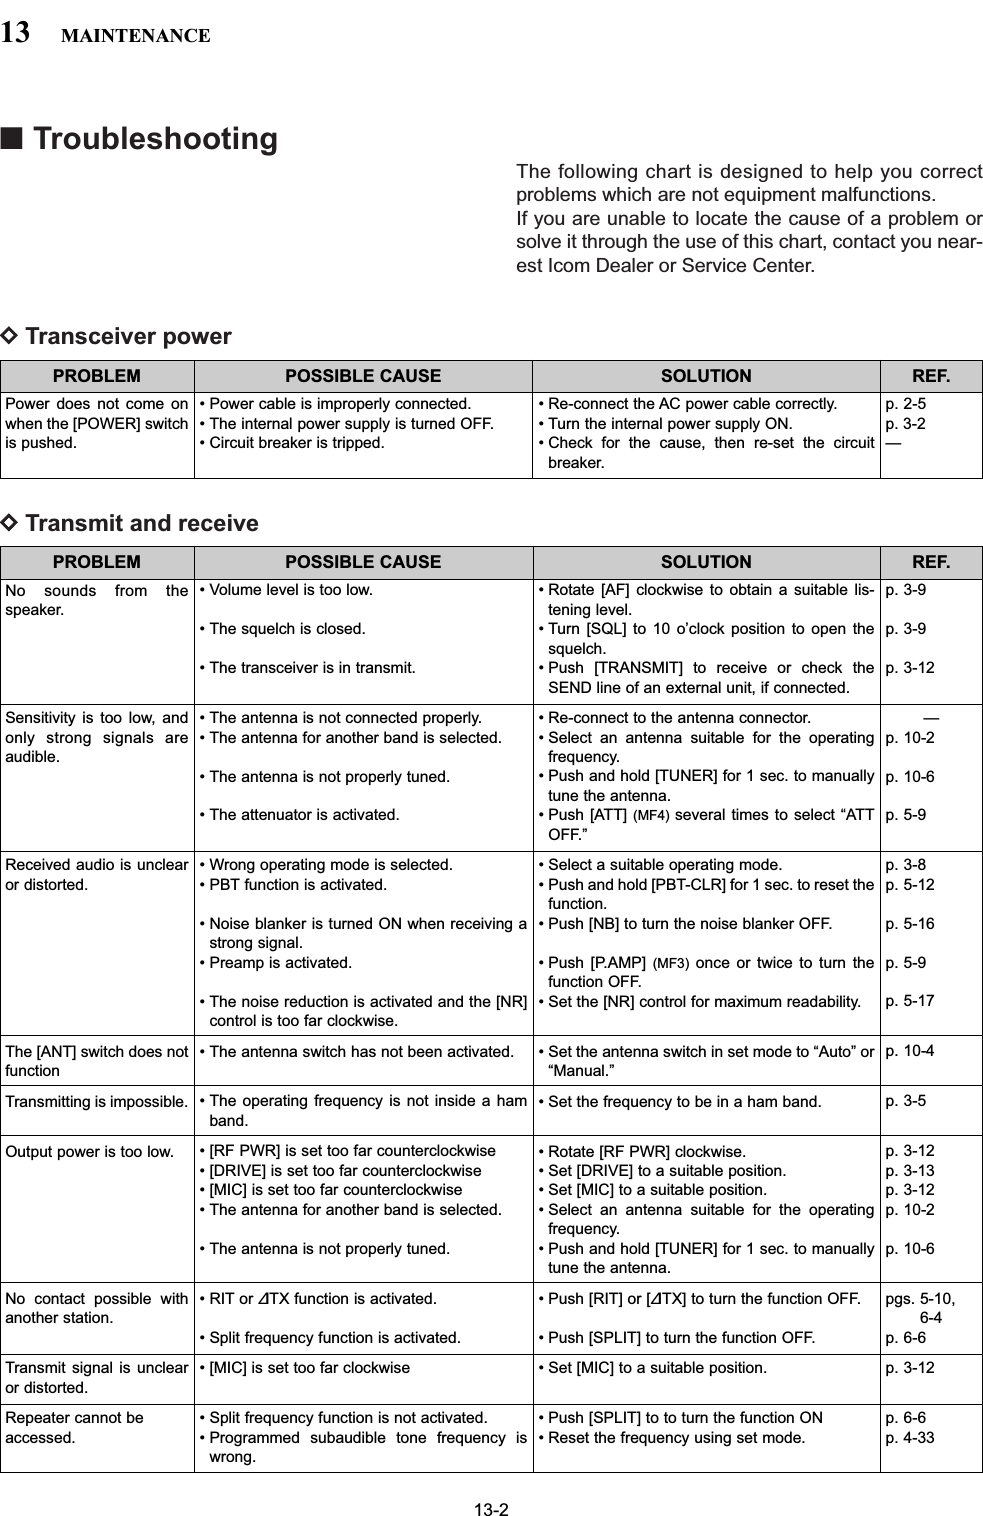 ■TroubleshootingThe following chart is designed to help you correctproblems which are not equipment malfunctions.If you are unable to locate the cause of a problem orsolve it through the use of this chart, contact you near-est Icom Dealer or Service Center.DTransceiver powerDTransmit and receivePROBLEM POSSIBLE CAUSE SOLUTION REF.No sounds from thespeaker.Sensitivity is too low, andonly strong signals areaudible.Received audio is unclearor distorted.The [ANT] switch does notfunctionTransmitting is impossible.Output power is too low.No contact possible withanother station.Transmit signal is unclearor distorted.Repeater cannot beaccessed.• Volume level is too low.• The squelch is closed.• The transceiver is in transmit.• The antenna is not connected properly.• The antenna for another band is selected.• The antenna is not properly tuned.• The attenuator is activated.• Wrong operating mode is selected.• PBT function is activated.• Noise blanker is turned ON when receiving astrong signal.• Preamp is activated.• The noise reduction is activated and the [NR]control is too far clockwise.• The antenna switch has not been activated.• The operating frequency is not inside a hamband.• [RF PWR] is set too far counterclockwise• [DRIVE] is set too far counterclockwise• [MIC] is set too far counterclockwise• The antenna for another band is selected.• The antenna is not properly tuned.• RIT or ∂TX function is activated.• Split frequency function is activated.• [MIC] is set too far clockwise• Split frequency function is not activated.• Programmed subaudible tone frequency iswrong.• Rotate [AF] clockwise to obtain a suitable lis-tening level.• Turn [SQL] to 10 o’clock position to open thesquelch.• Push [TRANSMIT] to receive or check theSEND line of an external unit, if connected.• Re-connect to the antenna connector.• Select an antenna suitable for the operatingfrequency.• Push and hold [TUNER] for 1 sec. to manuallytune the antenna.• Push [ATT] (MF4) several times to select “ATTOFF.”• Select a suitable operating mode.• Push and hold [PBT-CLR] for 1 sec. to reset thefunction.• Push [NB] to turn the noise blanker OFF.• Push [P.AMP] (MF3) once or twice to turn thefunction OFF.• Set the [NR] control for maximum readability.• Set the antenna switch in set mode to “Auto” or“Manual.”• Set the frequency to be in a ham band.• Rotate [RF PWR] clockwise.• Set [DRIVE] to a suitable position.• Set [MIC] to a suitable position.• Select an antenna suitable for the operatingfrequency.• Push and hold [TUNER] for 1 sec. to manuallytune the antenna.• Push [RIT] or [∂TX] to turn the function OFF.• Push [SPLIT] to turn the function OFF.• Set [MIC] to a suitable position.• Push [SPLIT] to to turn the function ON• Reset the frequency using set mode.p. 3-9p. 3-9p. 3-12—p. 10-2p. 10-6p. 5-9p. 3-8p. 5-12p. 5-16p. 5-9p. 5-17p. 10-4p. 3-5p. 3-12p. 3-13p. 3-12p. 10-2p. 10-6pgs. 5-10, 6-4p. 6-6p. 3-12p. 6-6p. 4-33PROBLEM POSSIBLE CAUSE SOLUTION REF.13-213 MAINTENANCEPower does not come onwhen the [POWER] switchis pushed.• Power cable is improperly connected.• The internal power supply is turned OFF.• Circuit breaker is tripped.• Re-connect the AC power cable correctly.• Turn the internal power supply ON.• Check for the cause, then re-set the circuitbreaker.p. 2-5p. 3-2—